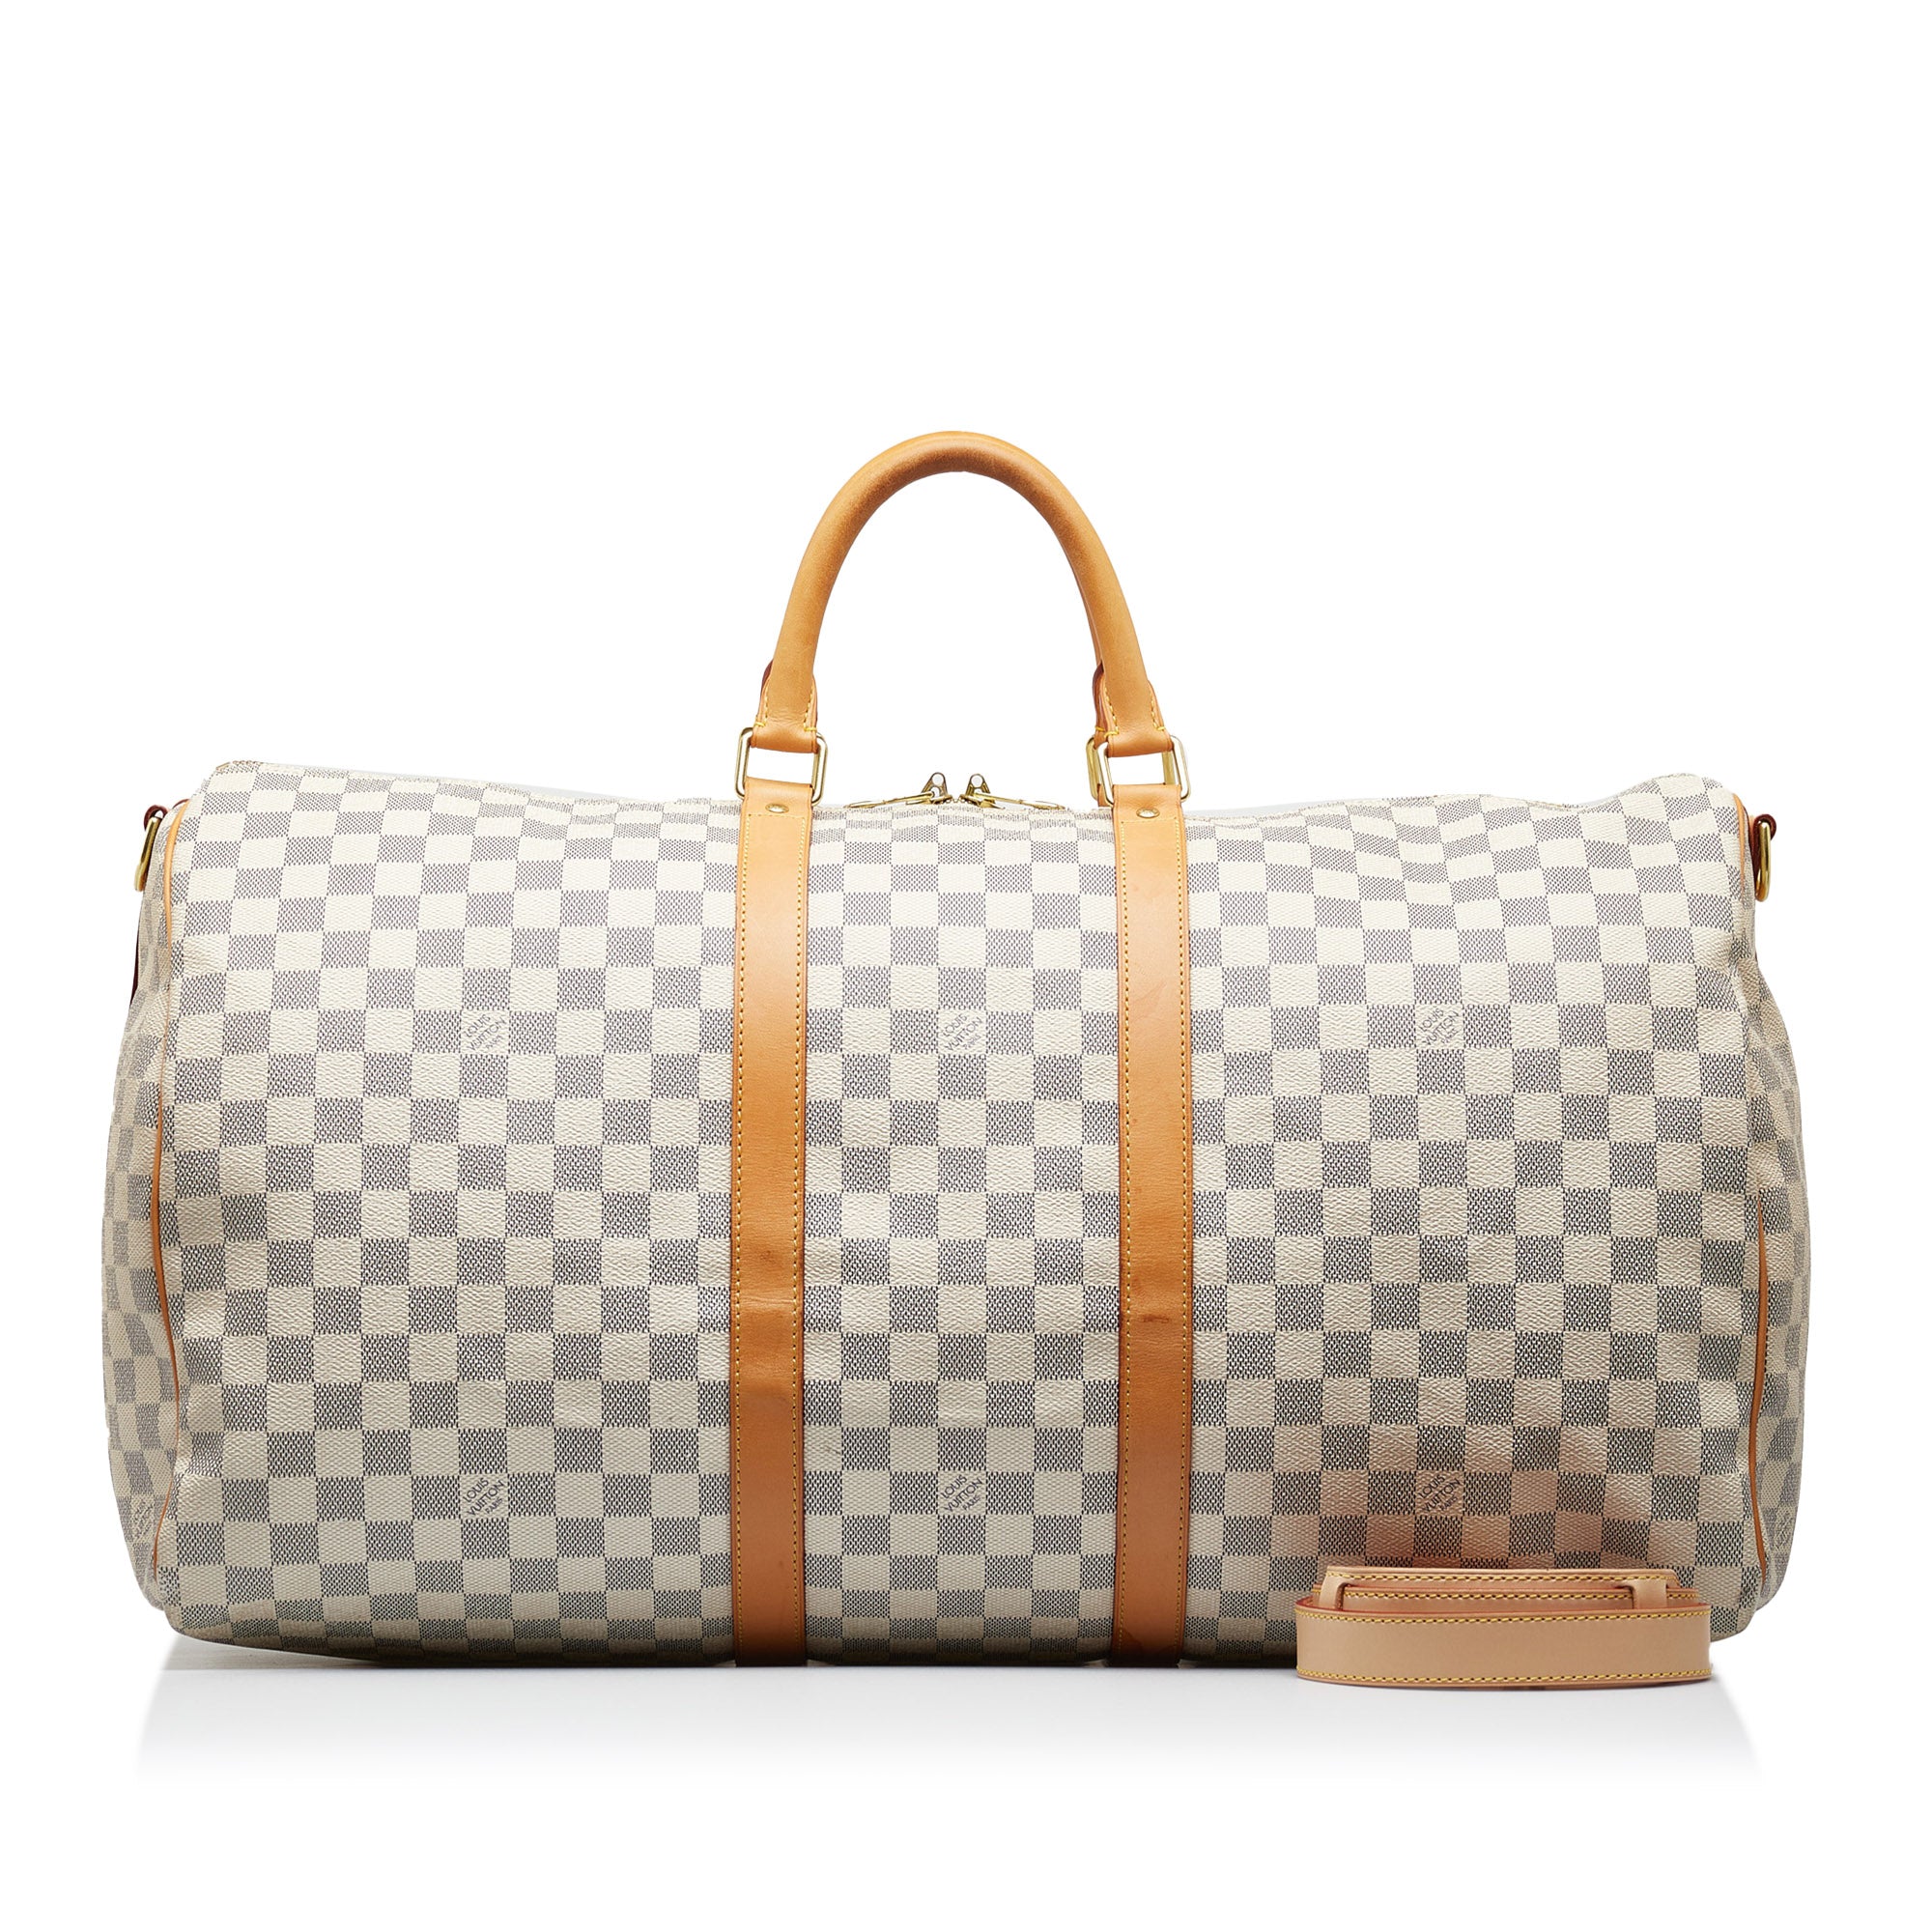 SOLD) Louis Vuitton Keepall 45 Bandouliere Damier  Louis vuitton keepall 45,  Louis vuitton, Louis vuitton travel bags